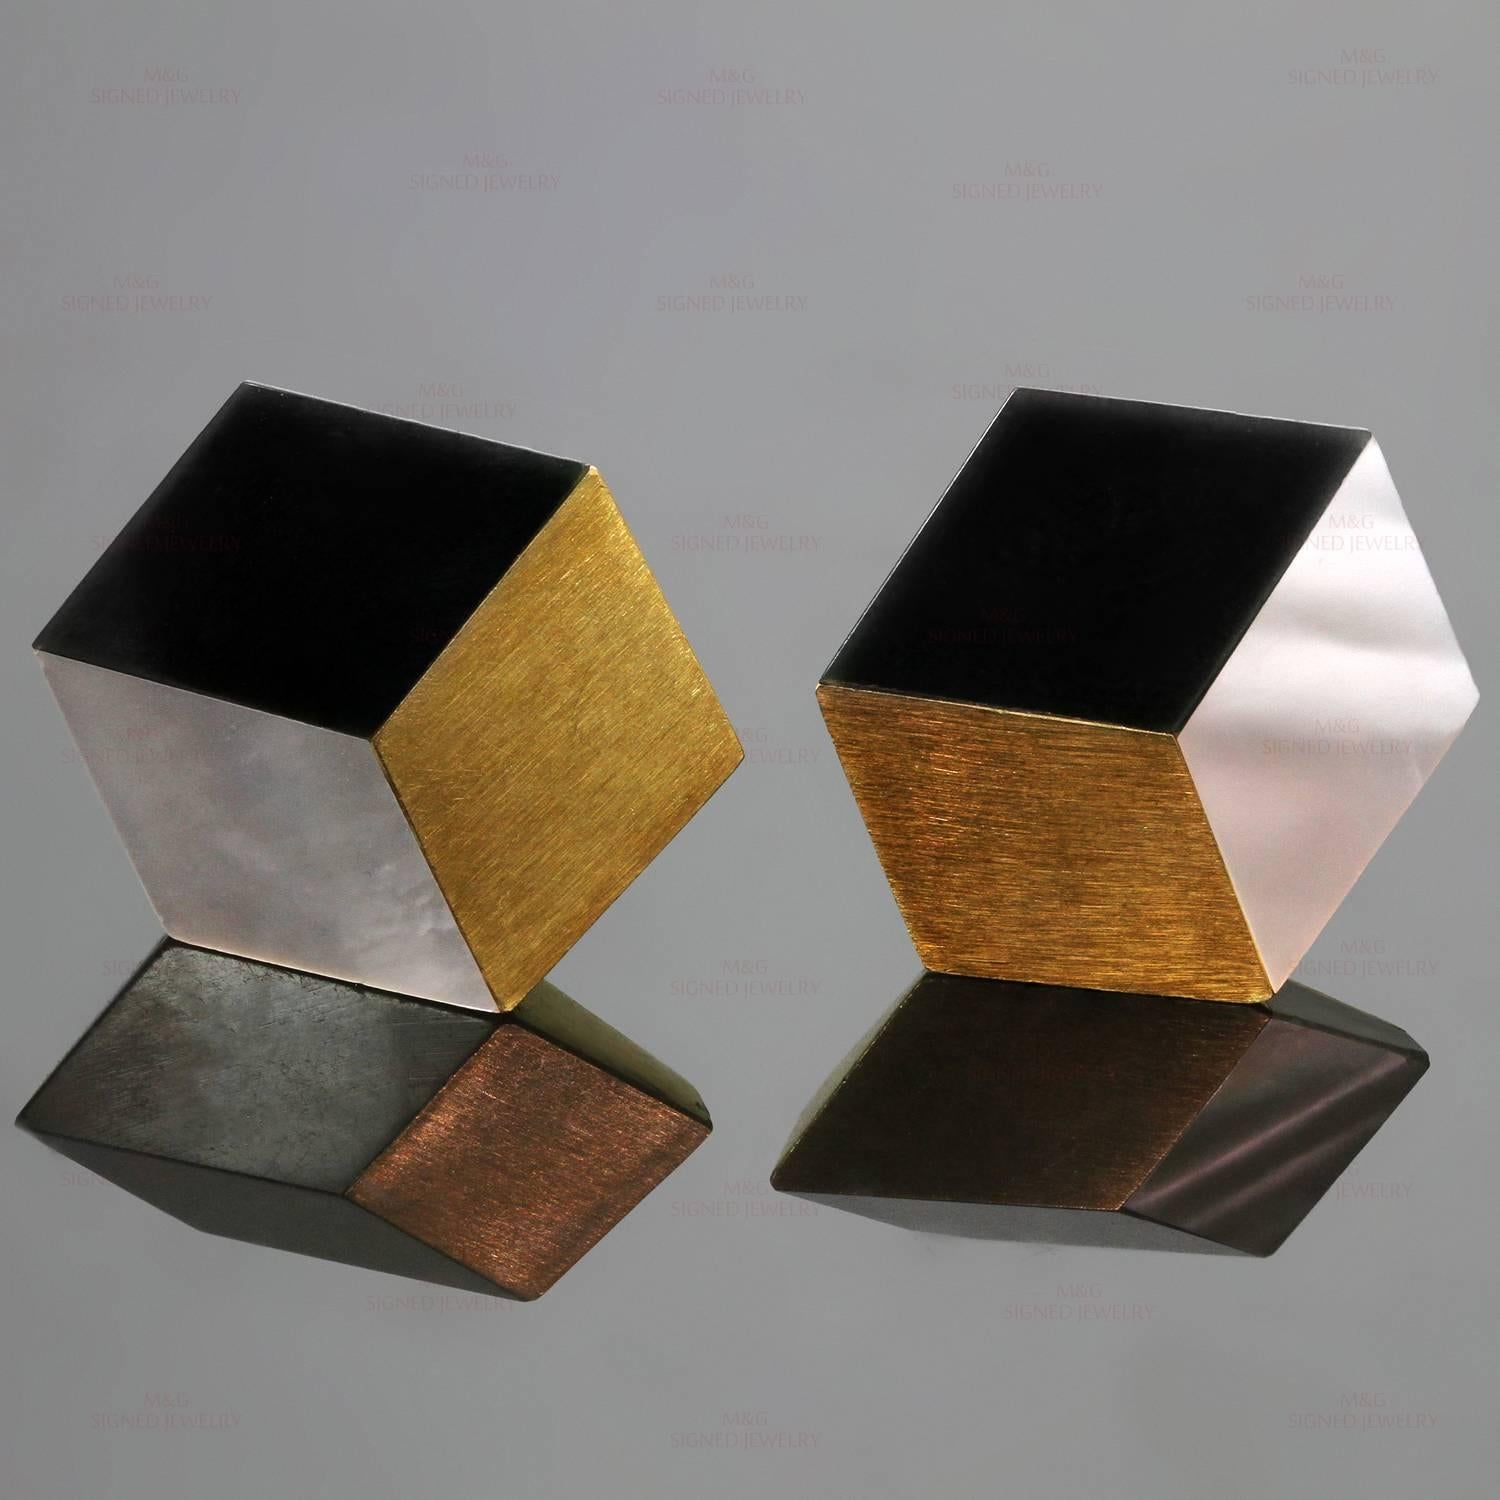 These rare and spectacular Angela Cummings earrings feature a chic cube design crafted in 18k yellow gold and accented with black onyx and mother-of-pearl. Made in United States circa 1980s. Measurements: 0.90